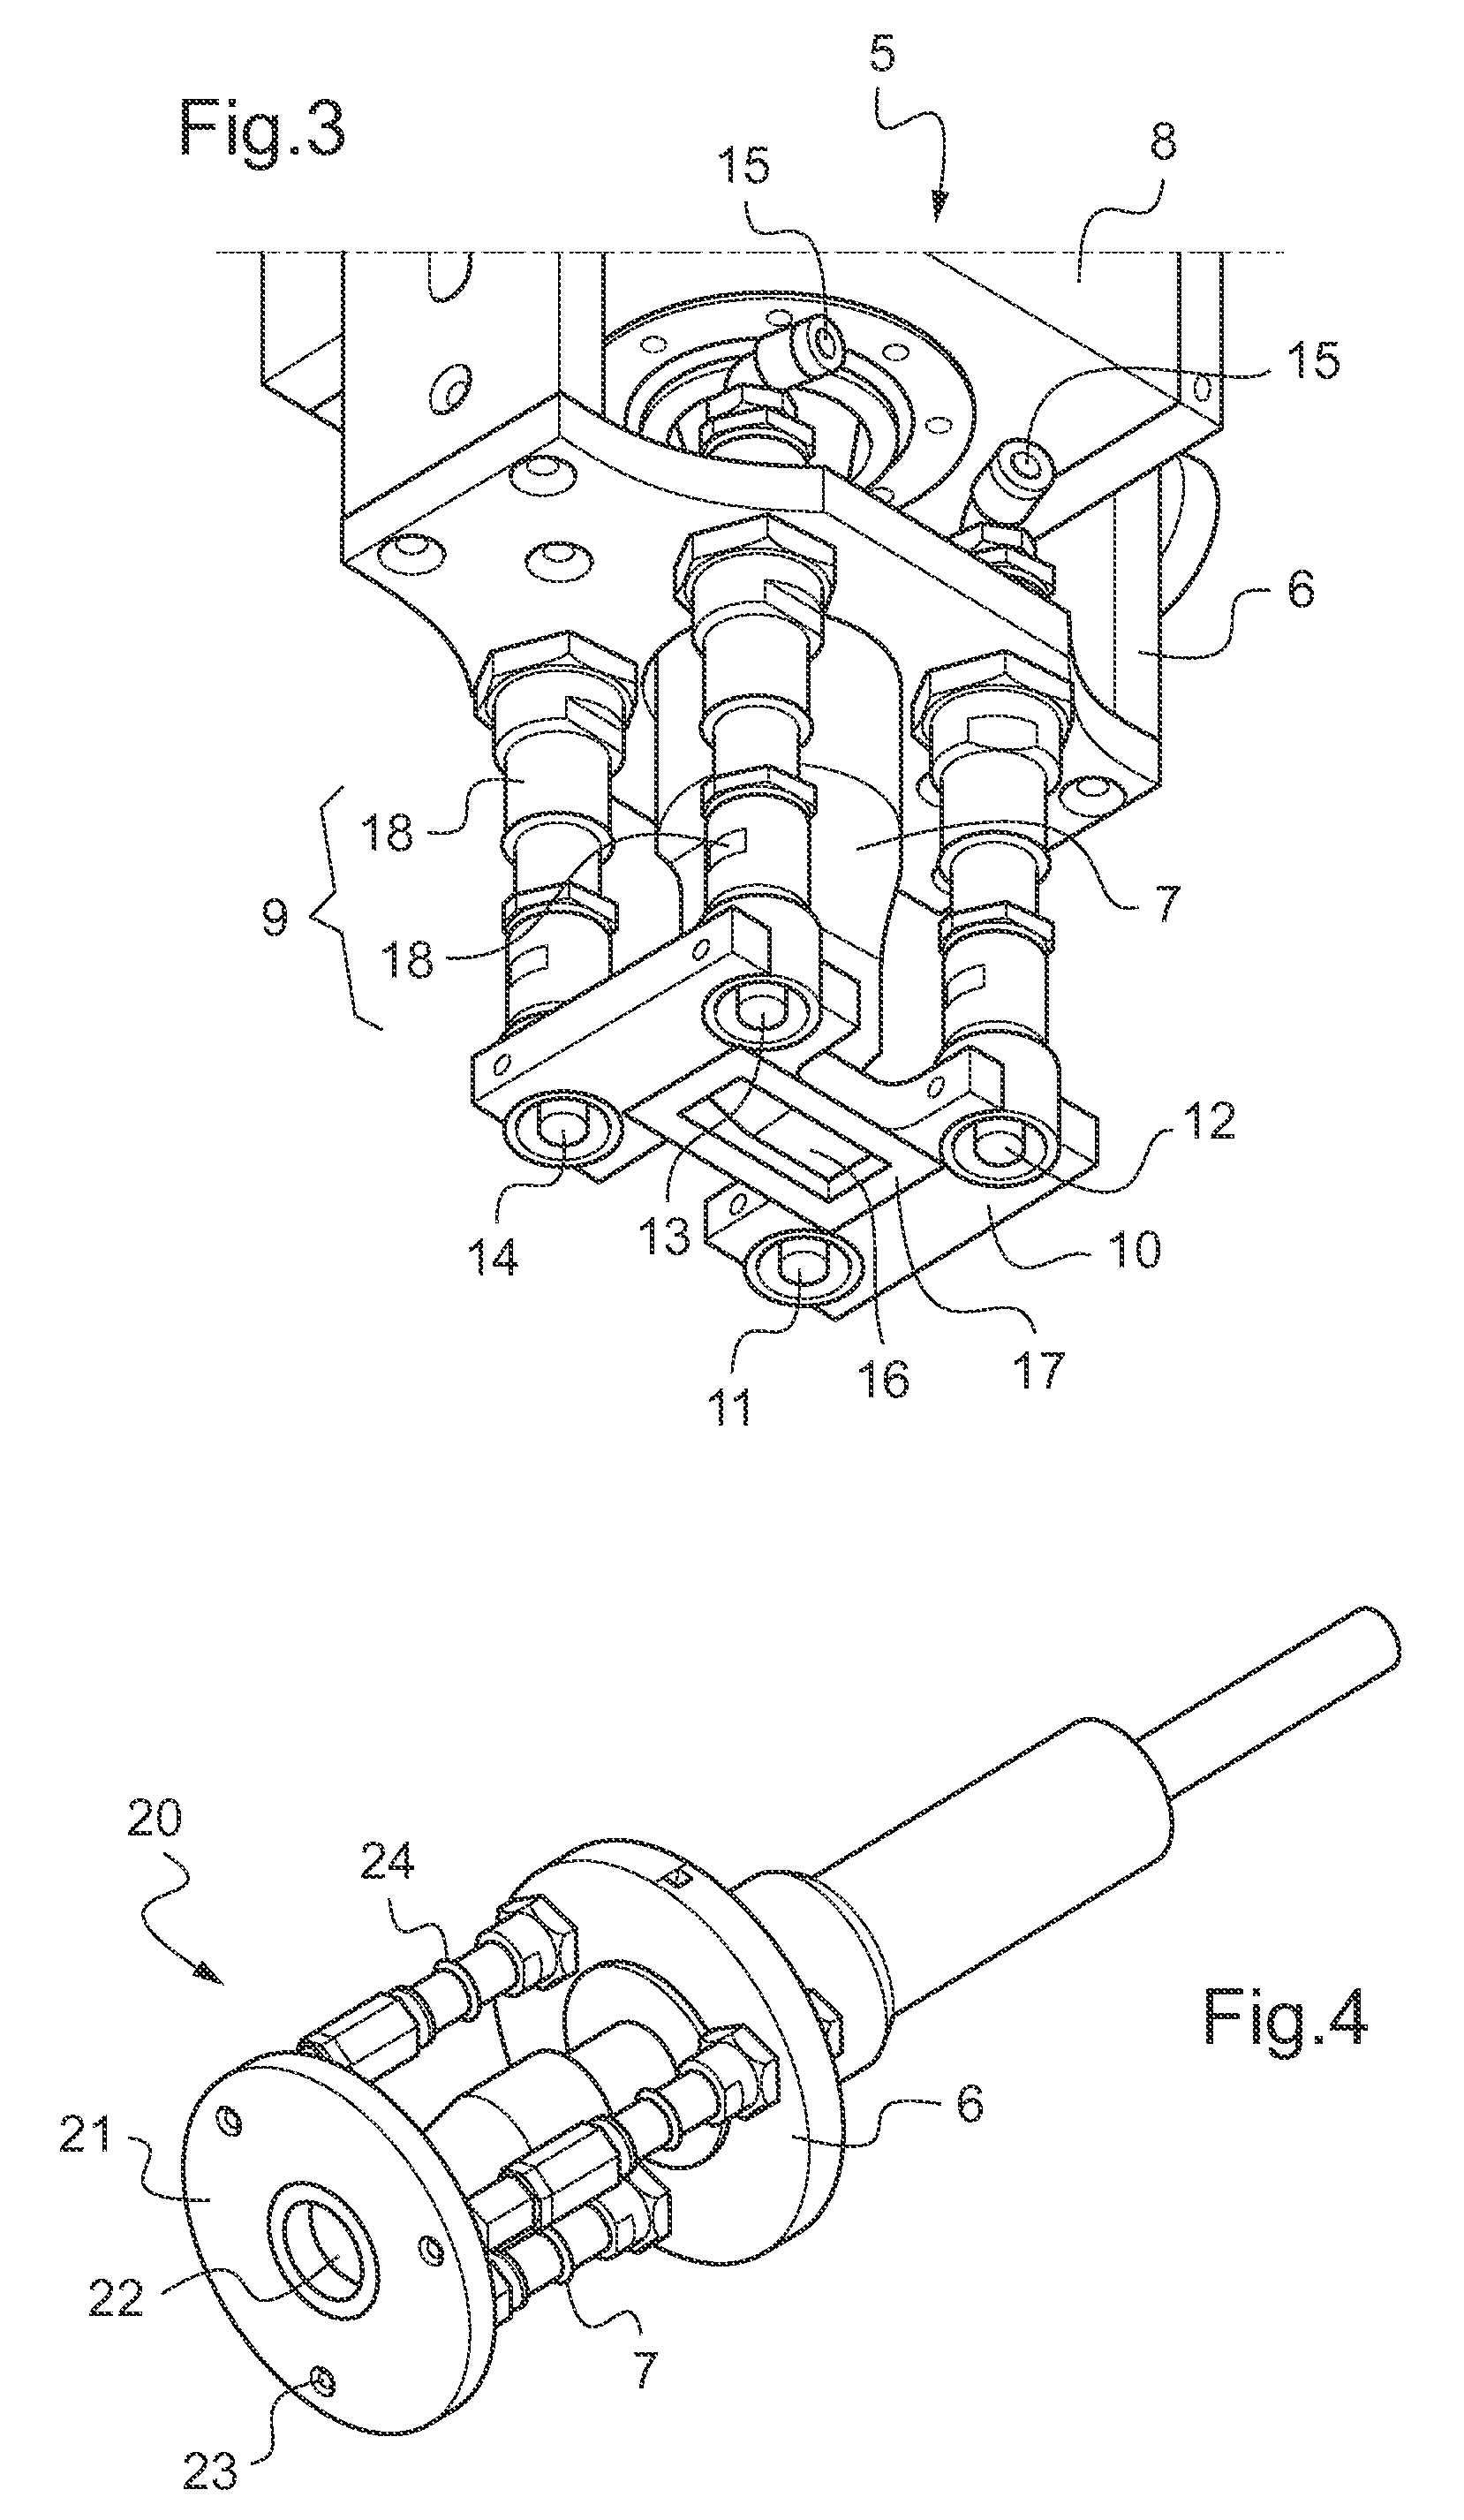 Ultrasonic welding device and method of operating said device